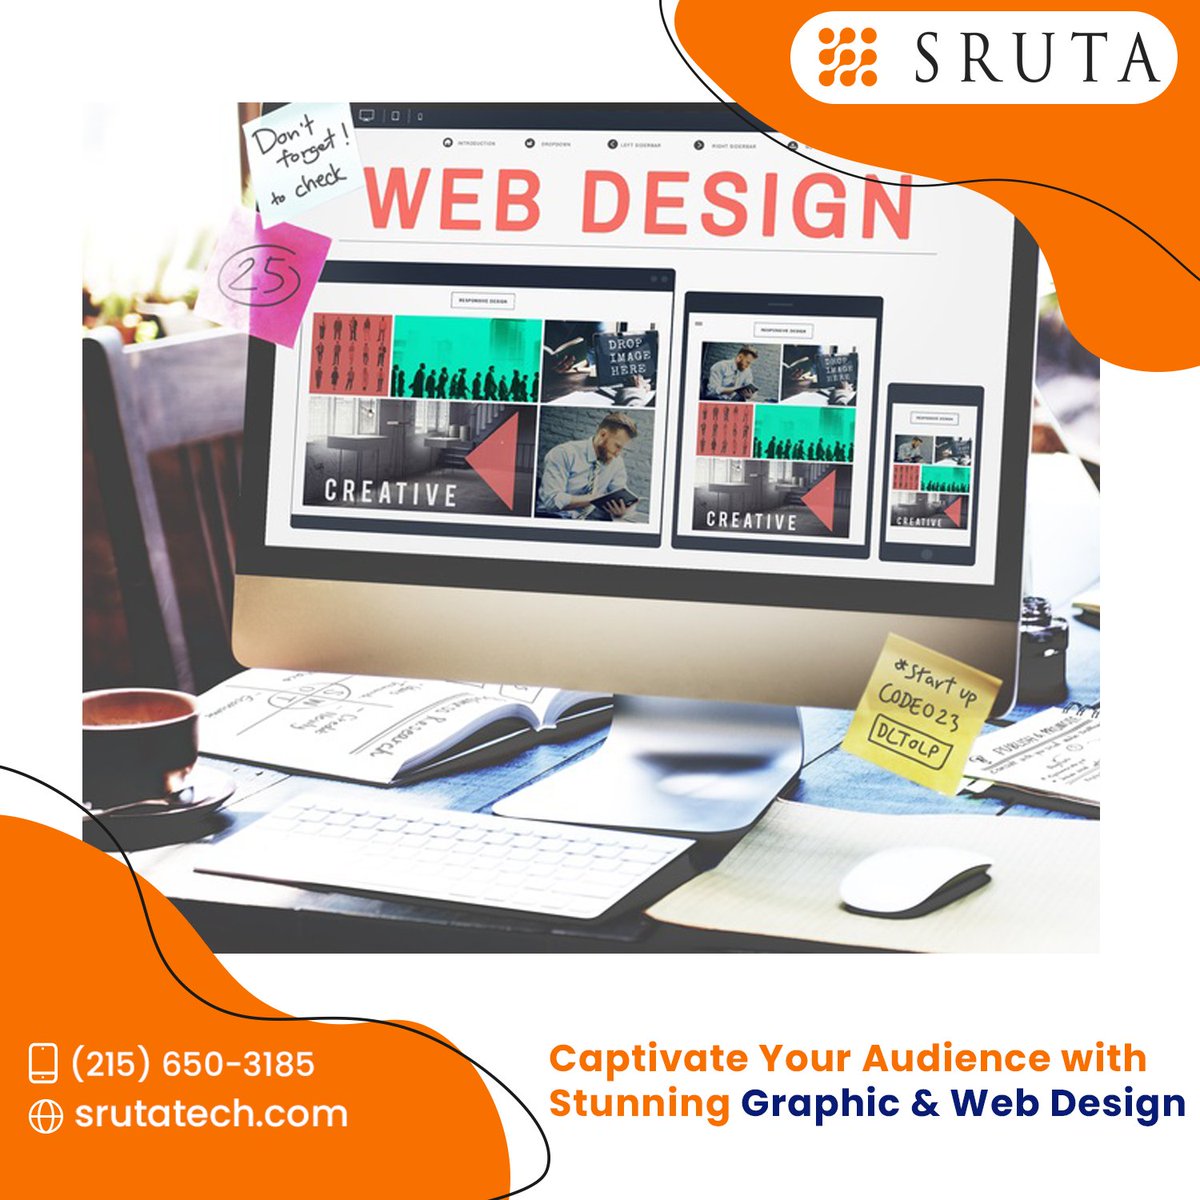 🎨 Aesthetic meets functionality! Our Graphic & Web Design services redefine your digital presence. Stand out in the online crowd with captivating vis#webpresence

Know more at srutatech.com/?utm_source=Tw…

#DigitalDesign #WebPresence #webdesign #website #design #marketing #event